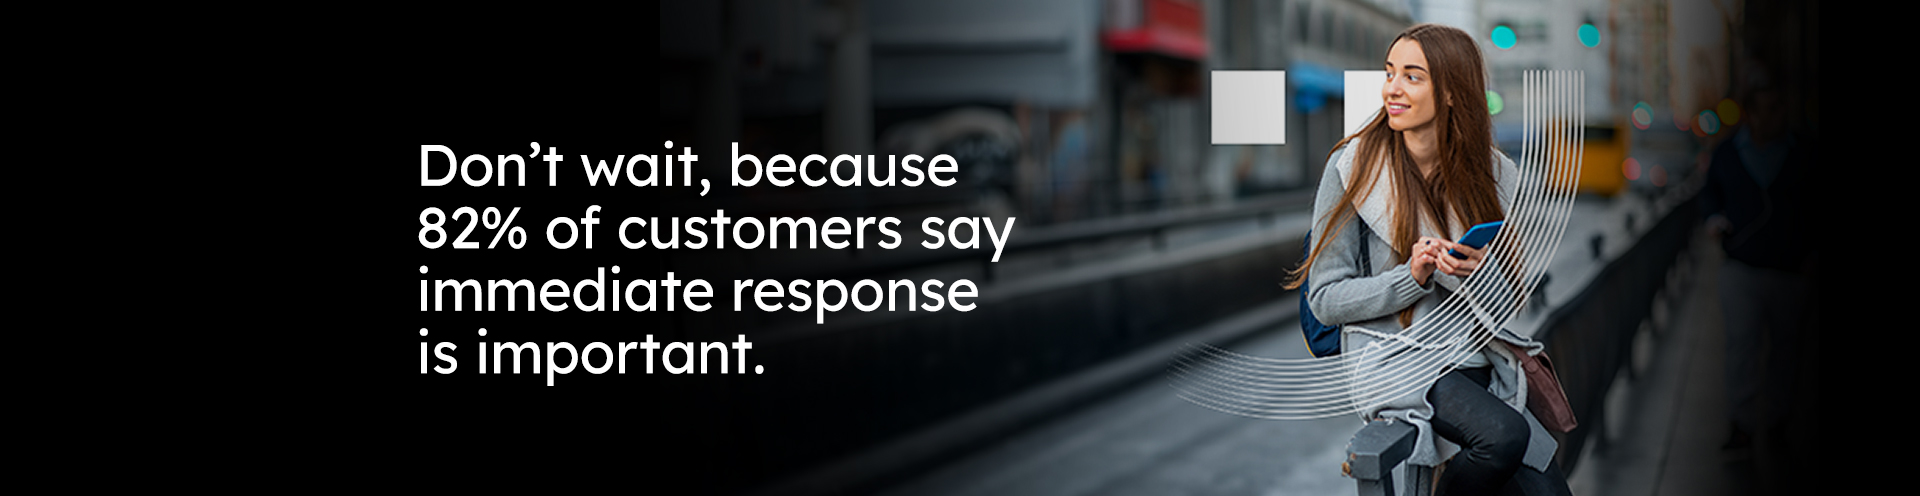 Don’t wait, because 82% of customers  say immediate response is important.